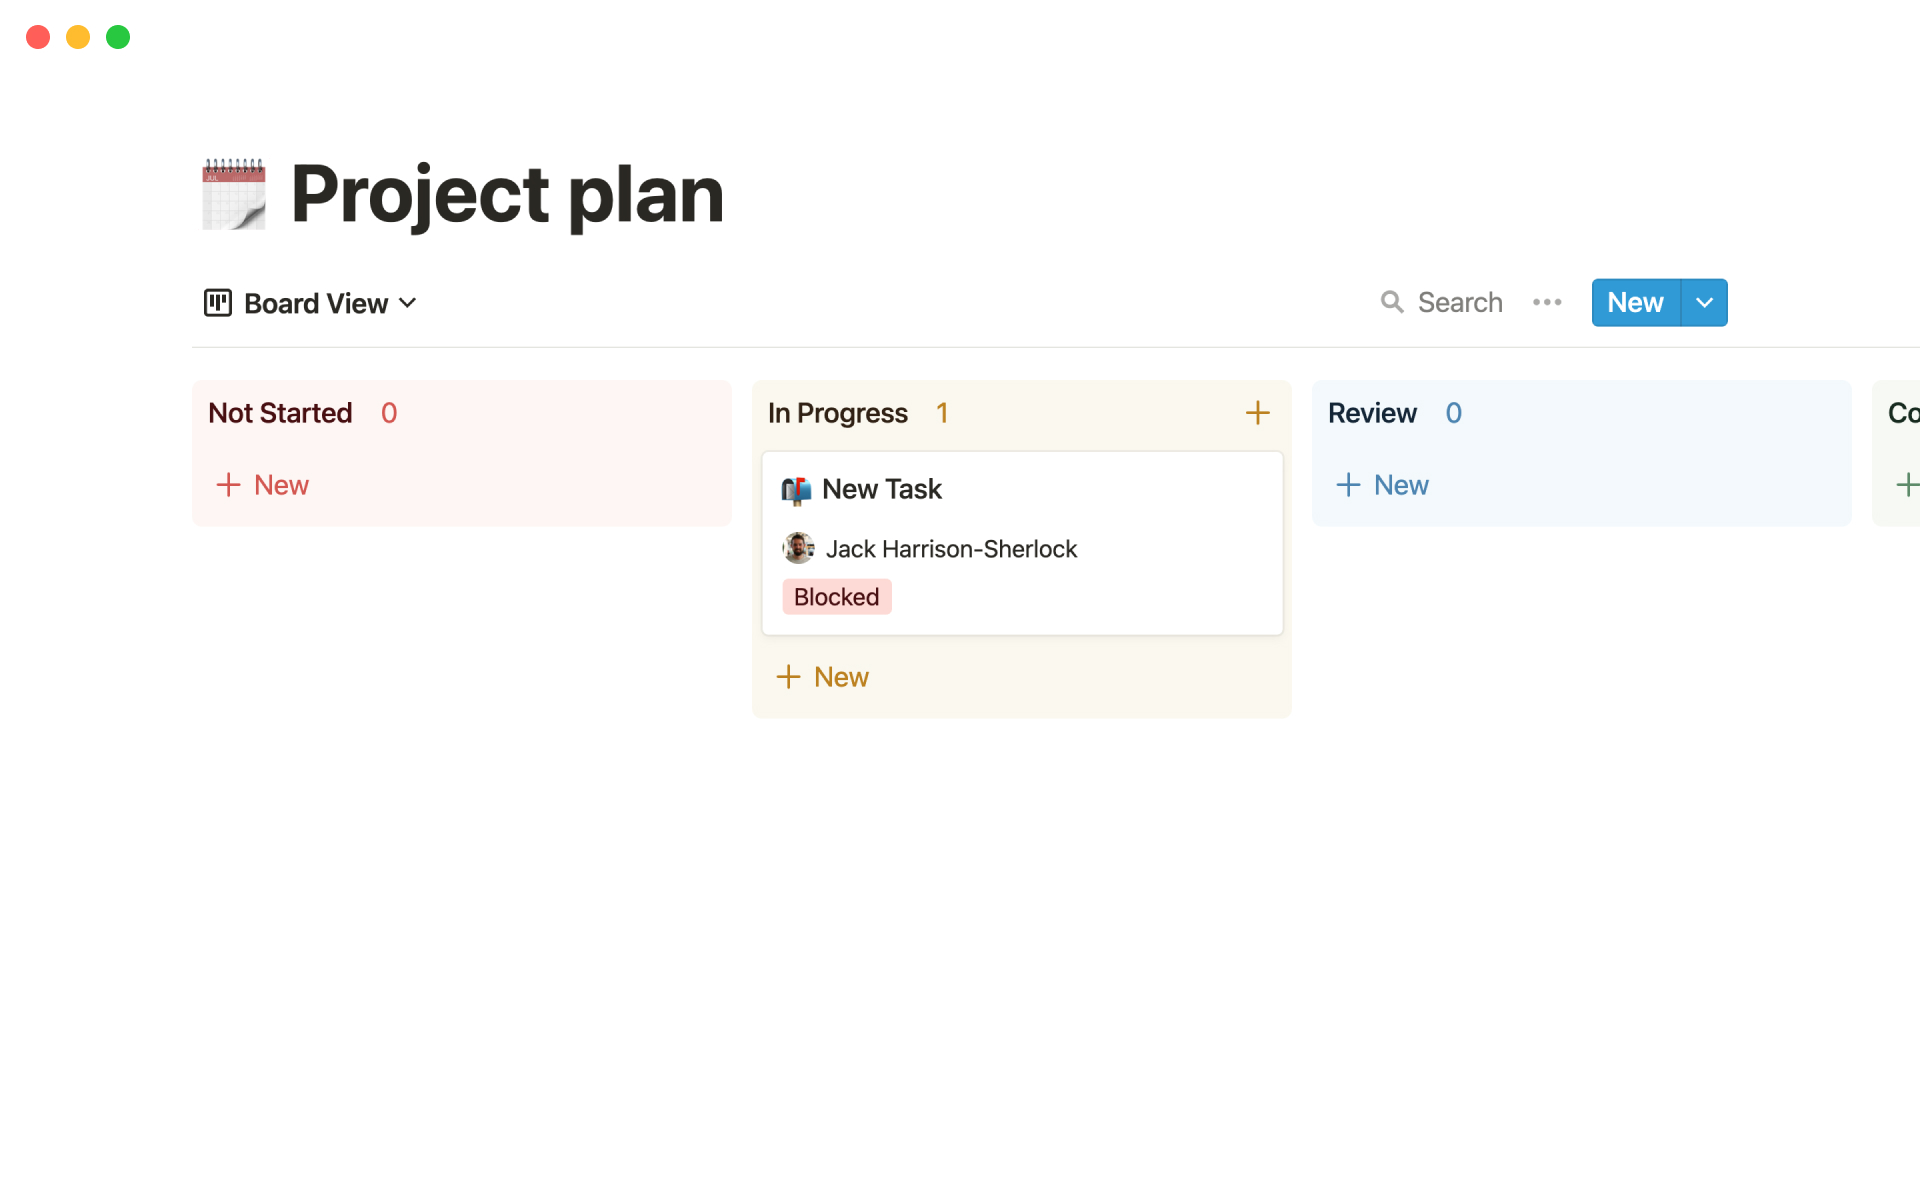 Quickly plan your next project!